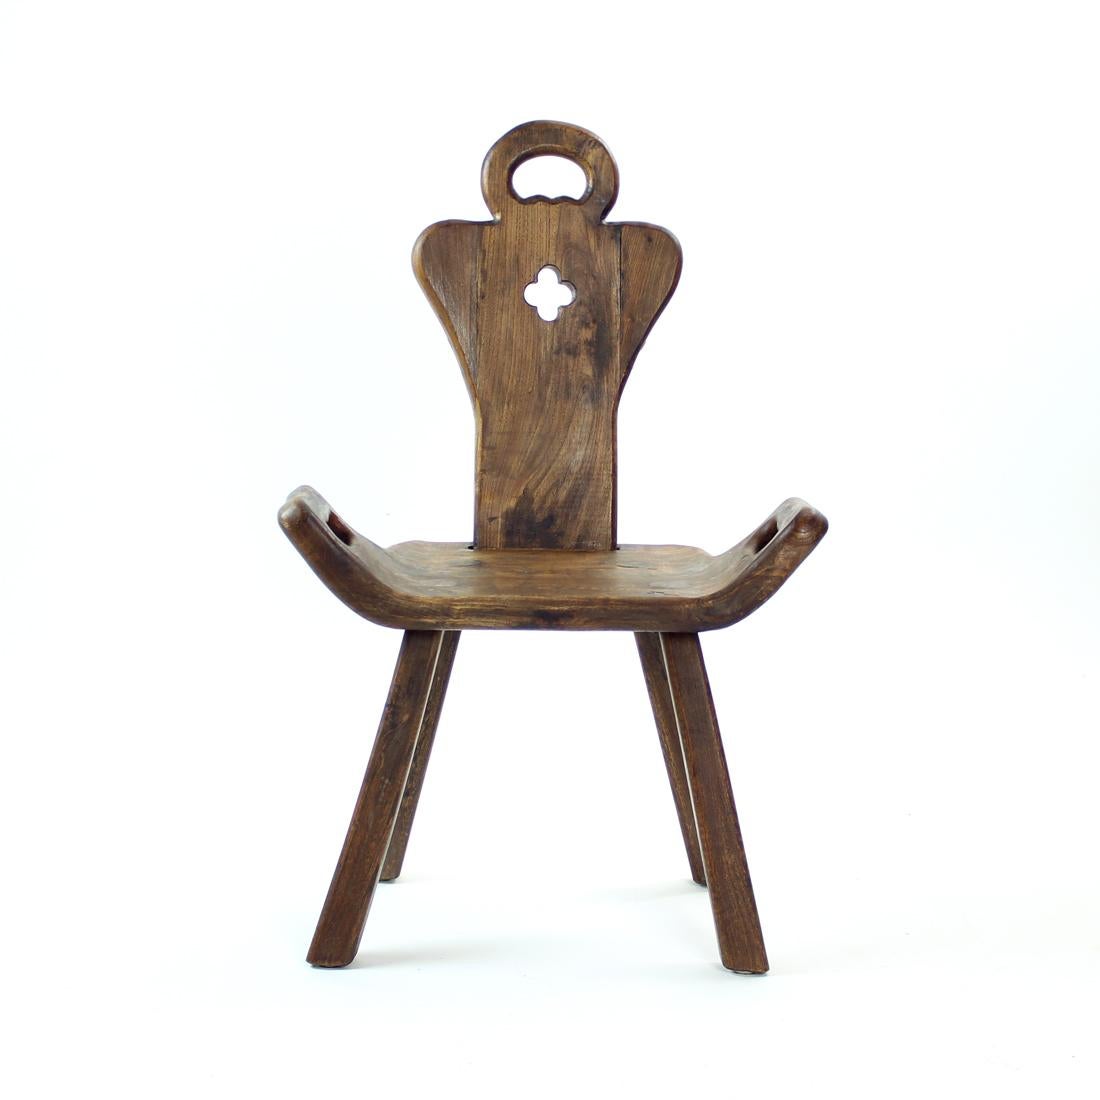 Beautiful vintage chair made in the beginning of 20th century in Holland. We have two of these available, they are same but each is slightly different as they are handmade. Great design for an occassional chair which is lower than a usual chair.